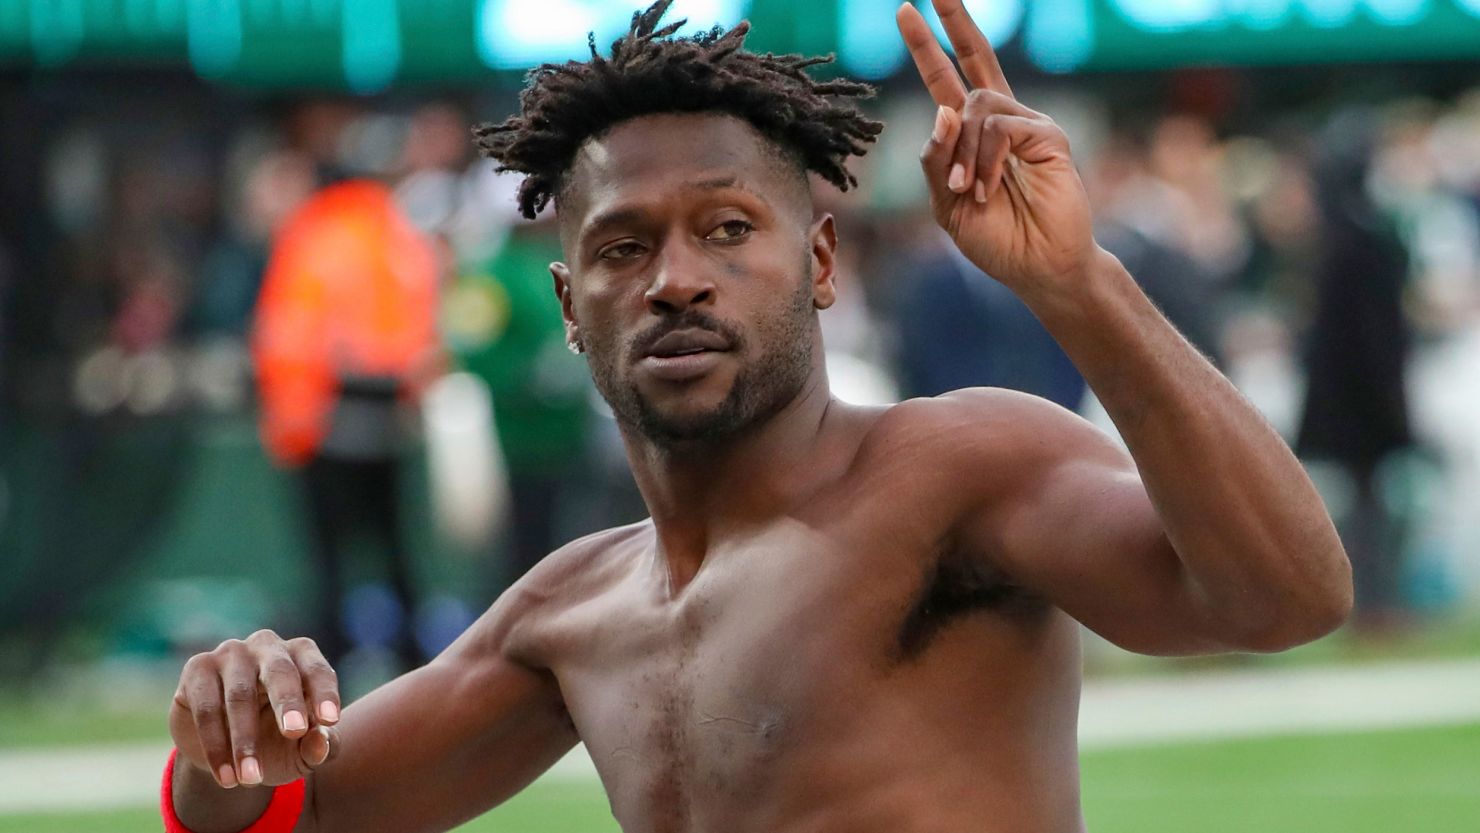 Antonio Brown gestures to the crowd as he leaves the field while his team's offense is on the field against the New York Jets.